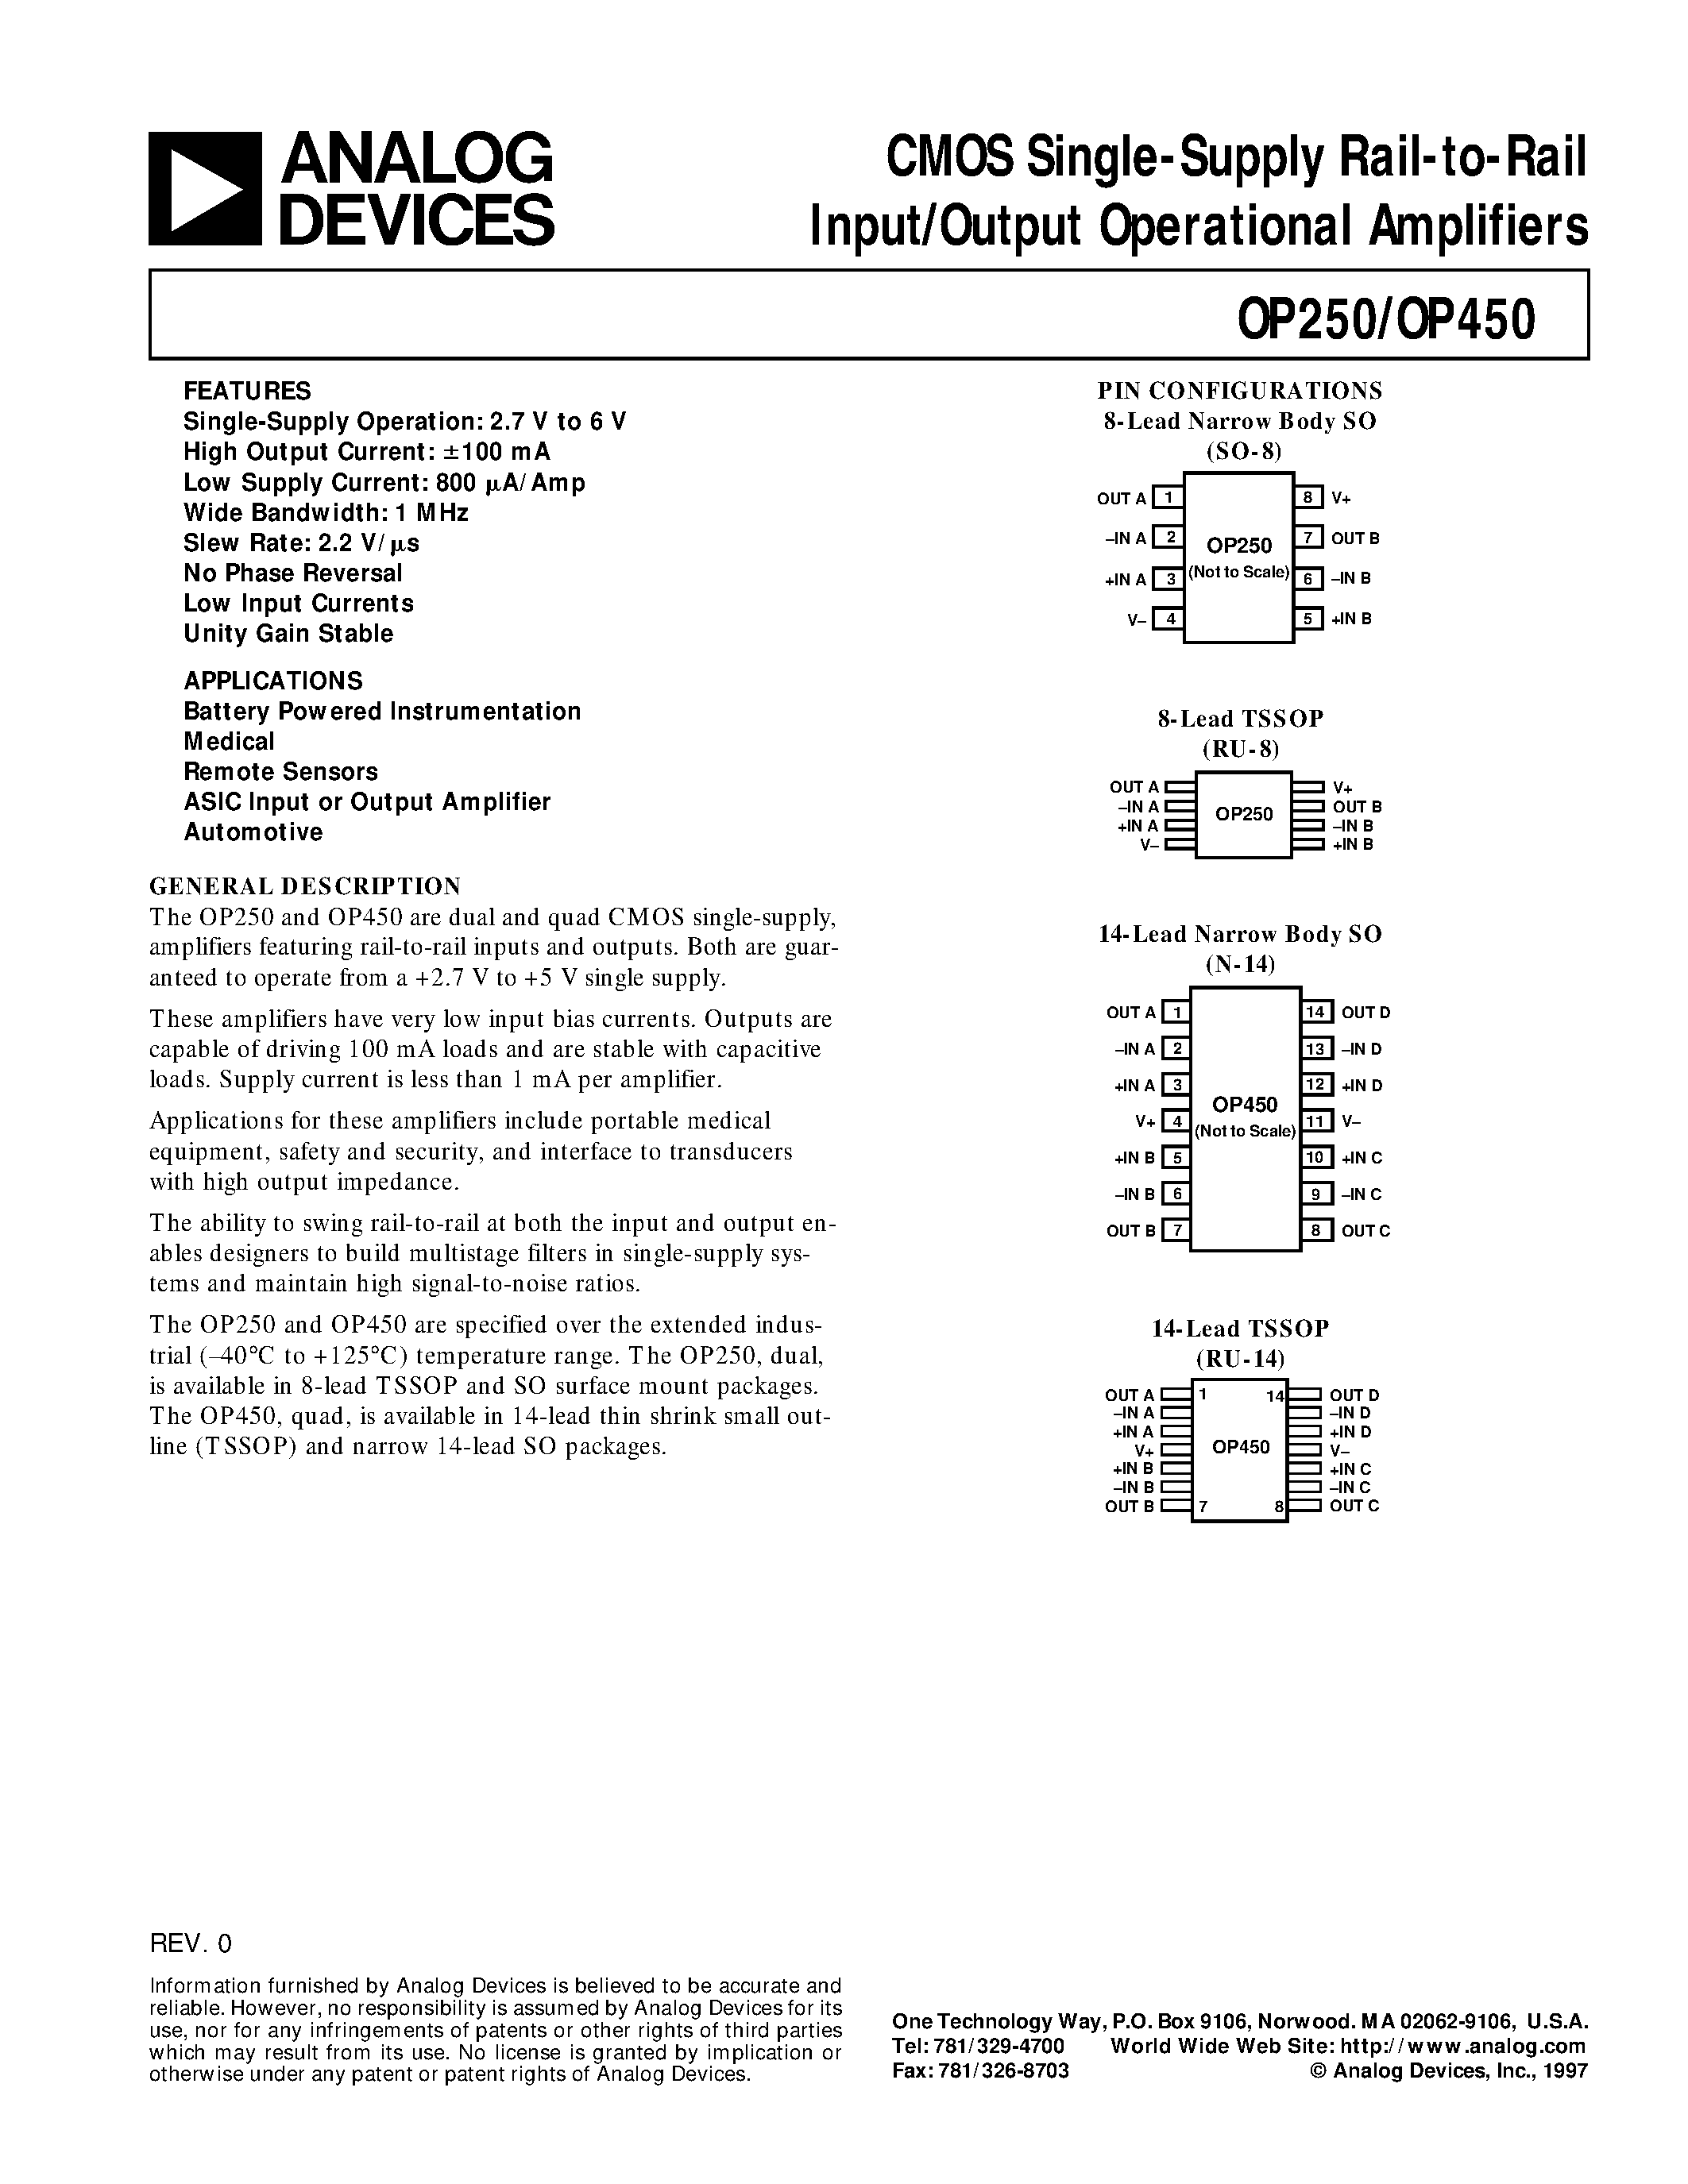 Datasheet OP250 - CMOS Single-Supply Rail-to-Rail Input/Output Operational Amplifiers page 1